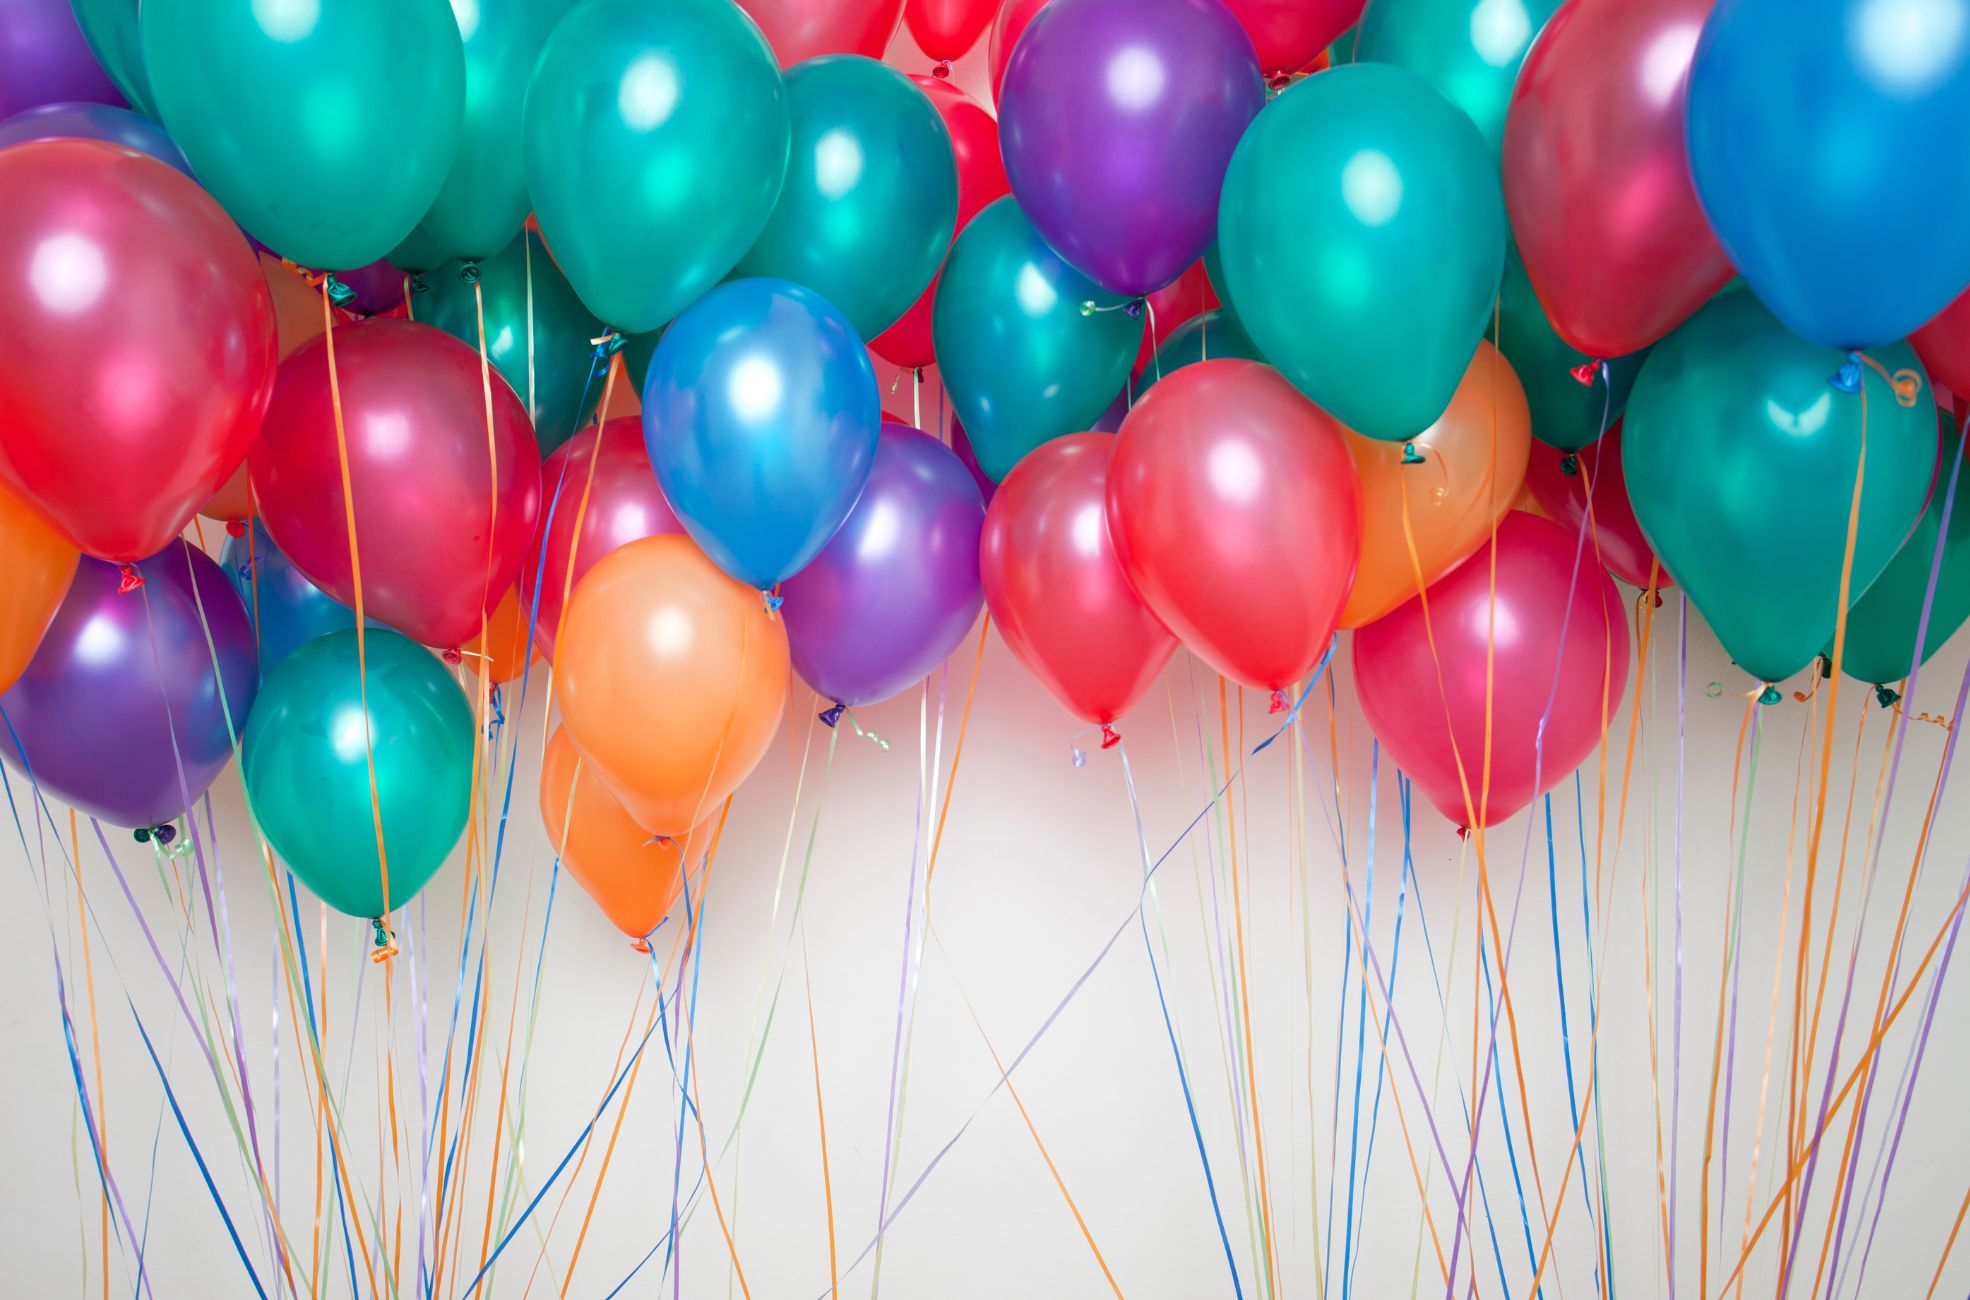 Stock Photo of Colourful Balloons For A Party